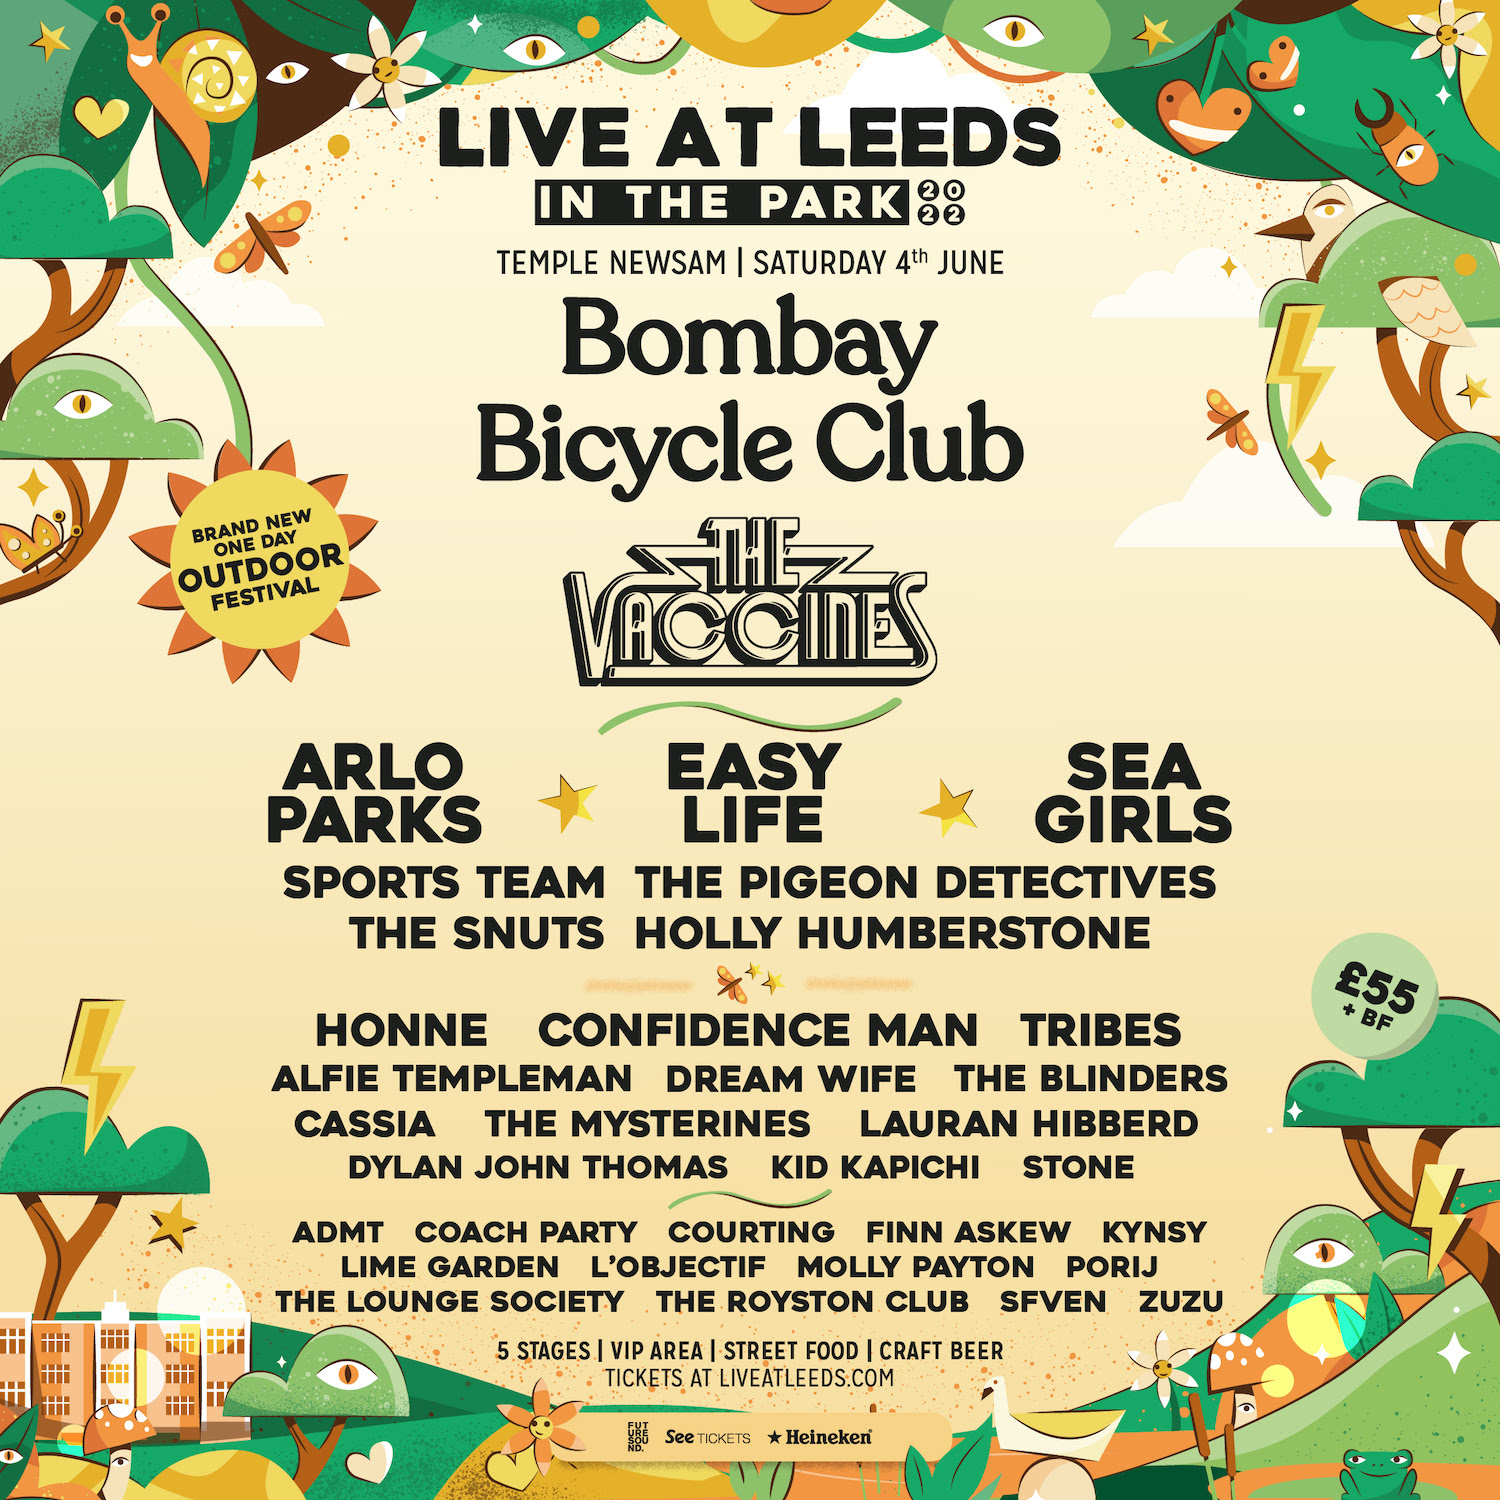 Live at leeds in the park line up poster